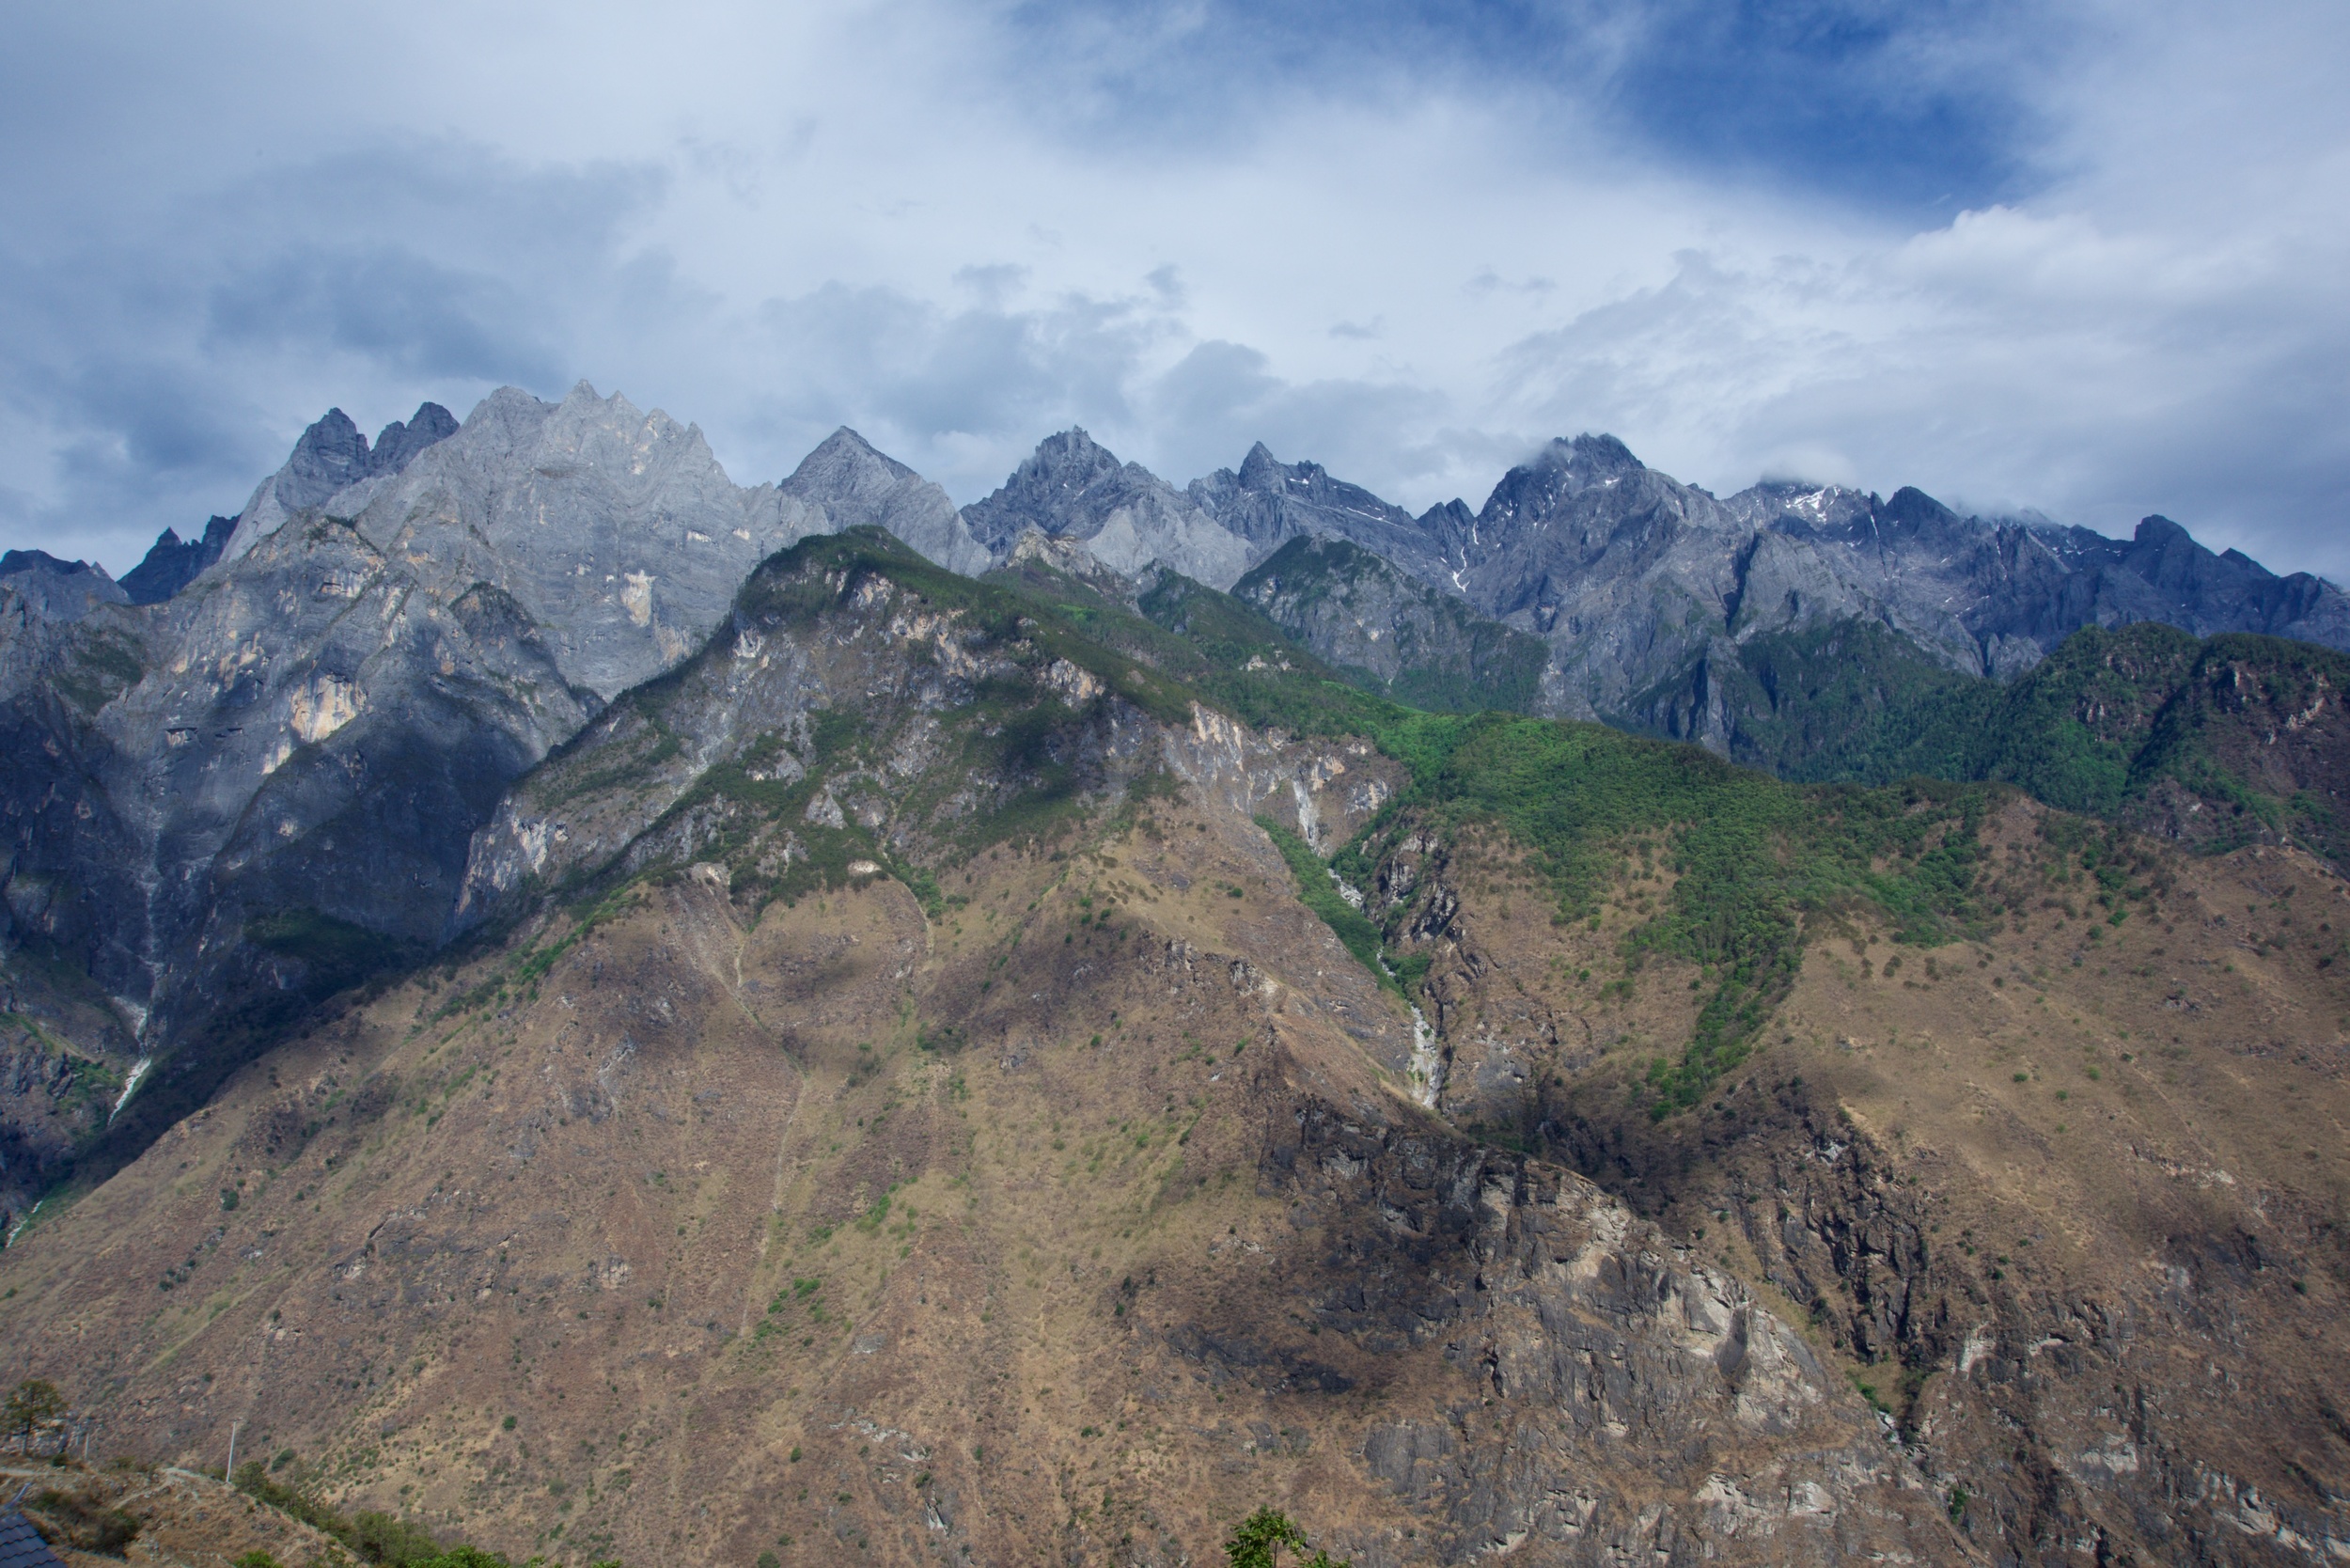  Tiger Leaping Gorge&nbsp; 